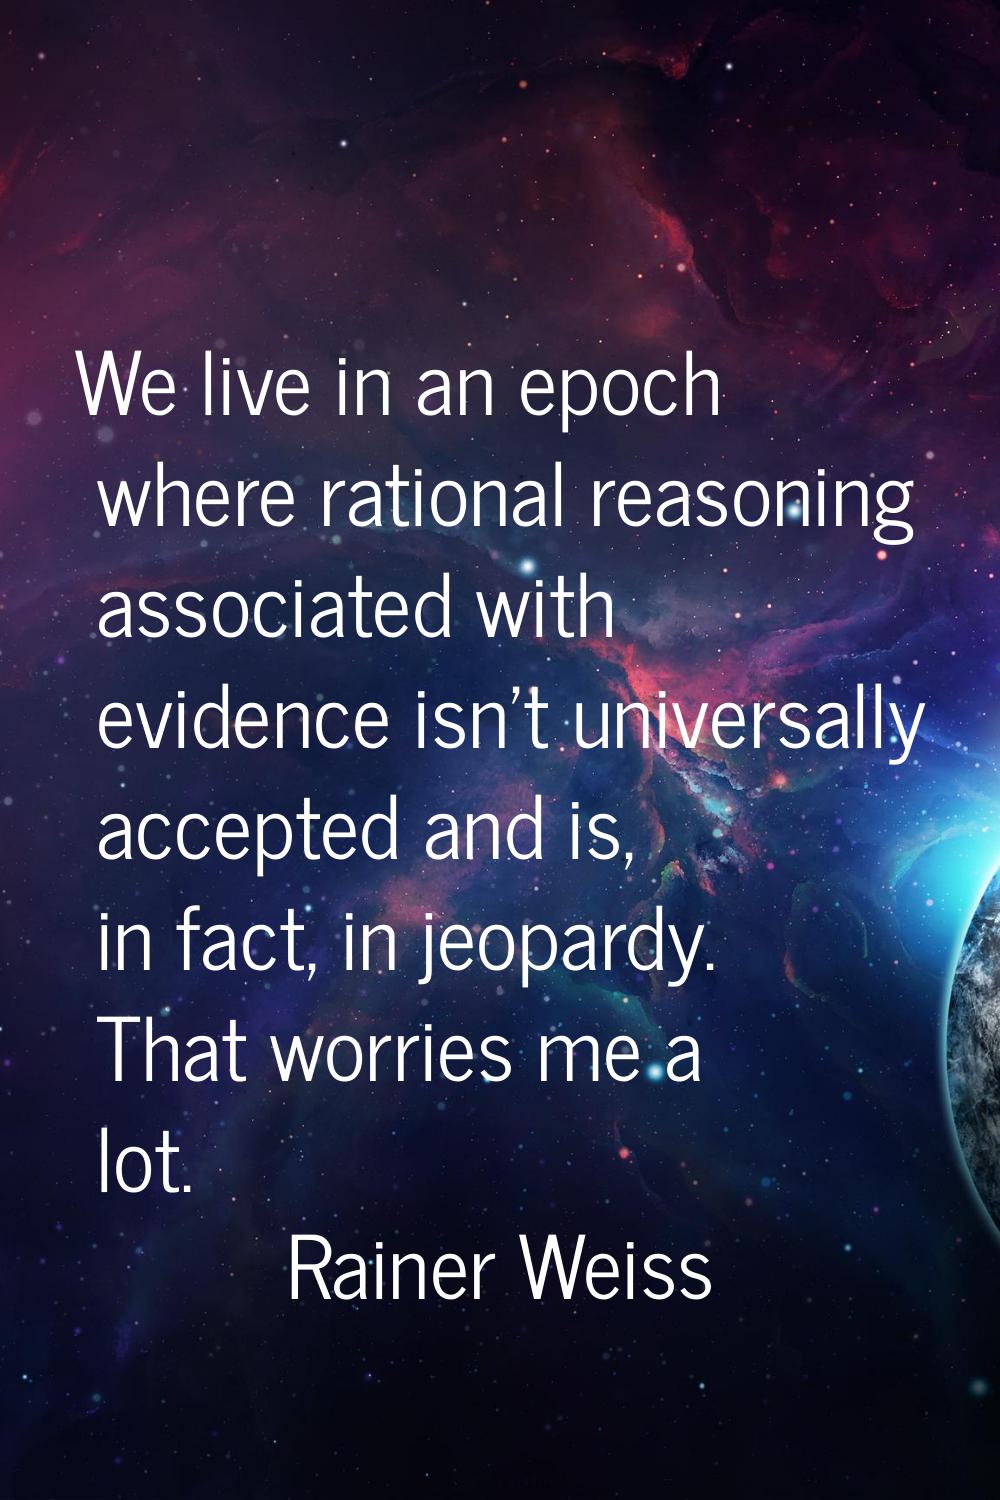 We live in an epoch where rational reasoning associated with evidence isn't universally accepted an